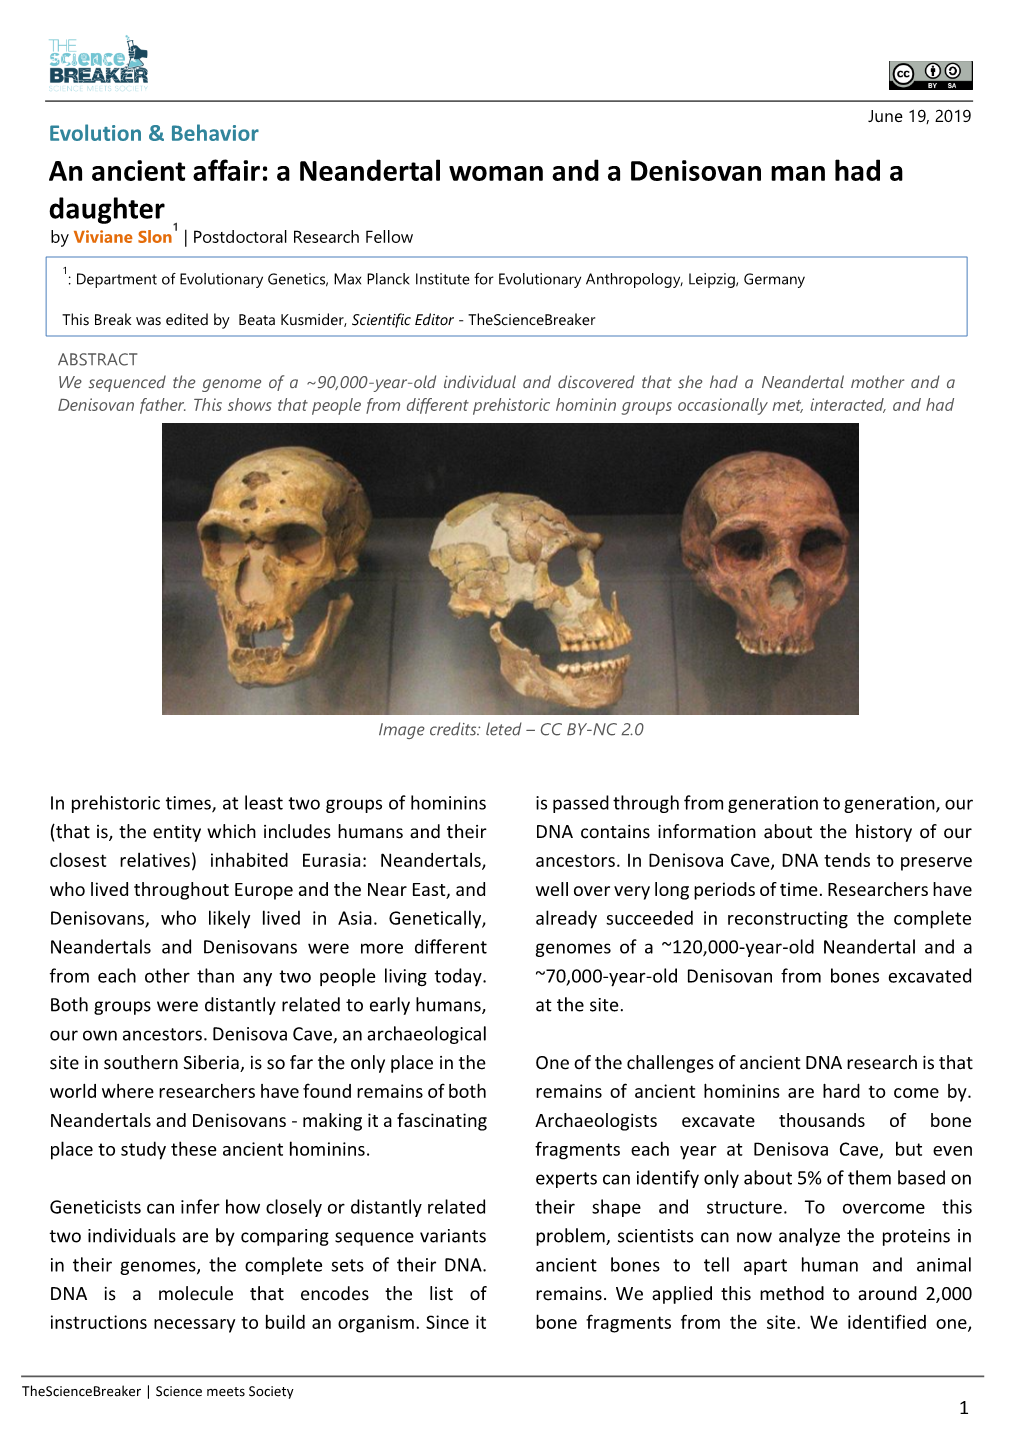 An Ancient Affair: a Neandertal Woman and a Denisovan Man Had a Daughter 1 by Viviane Slon | Postdoctoral Research Fellow